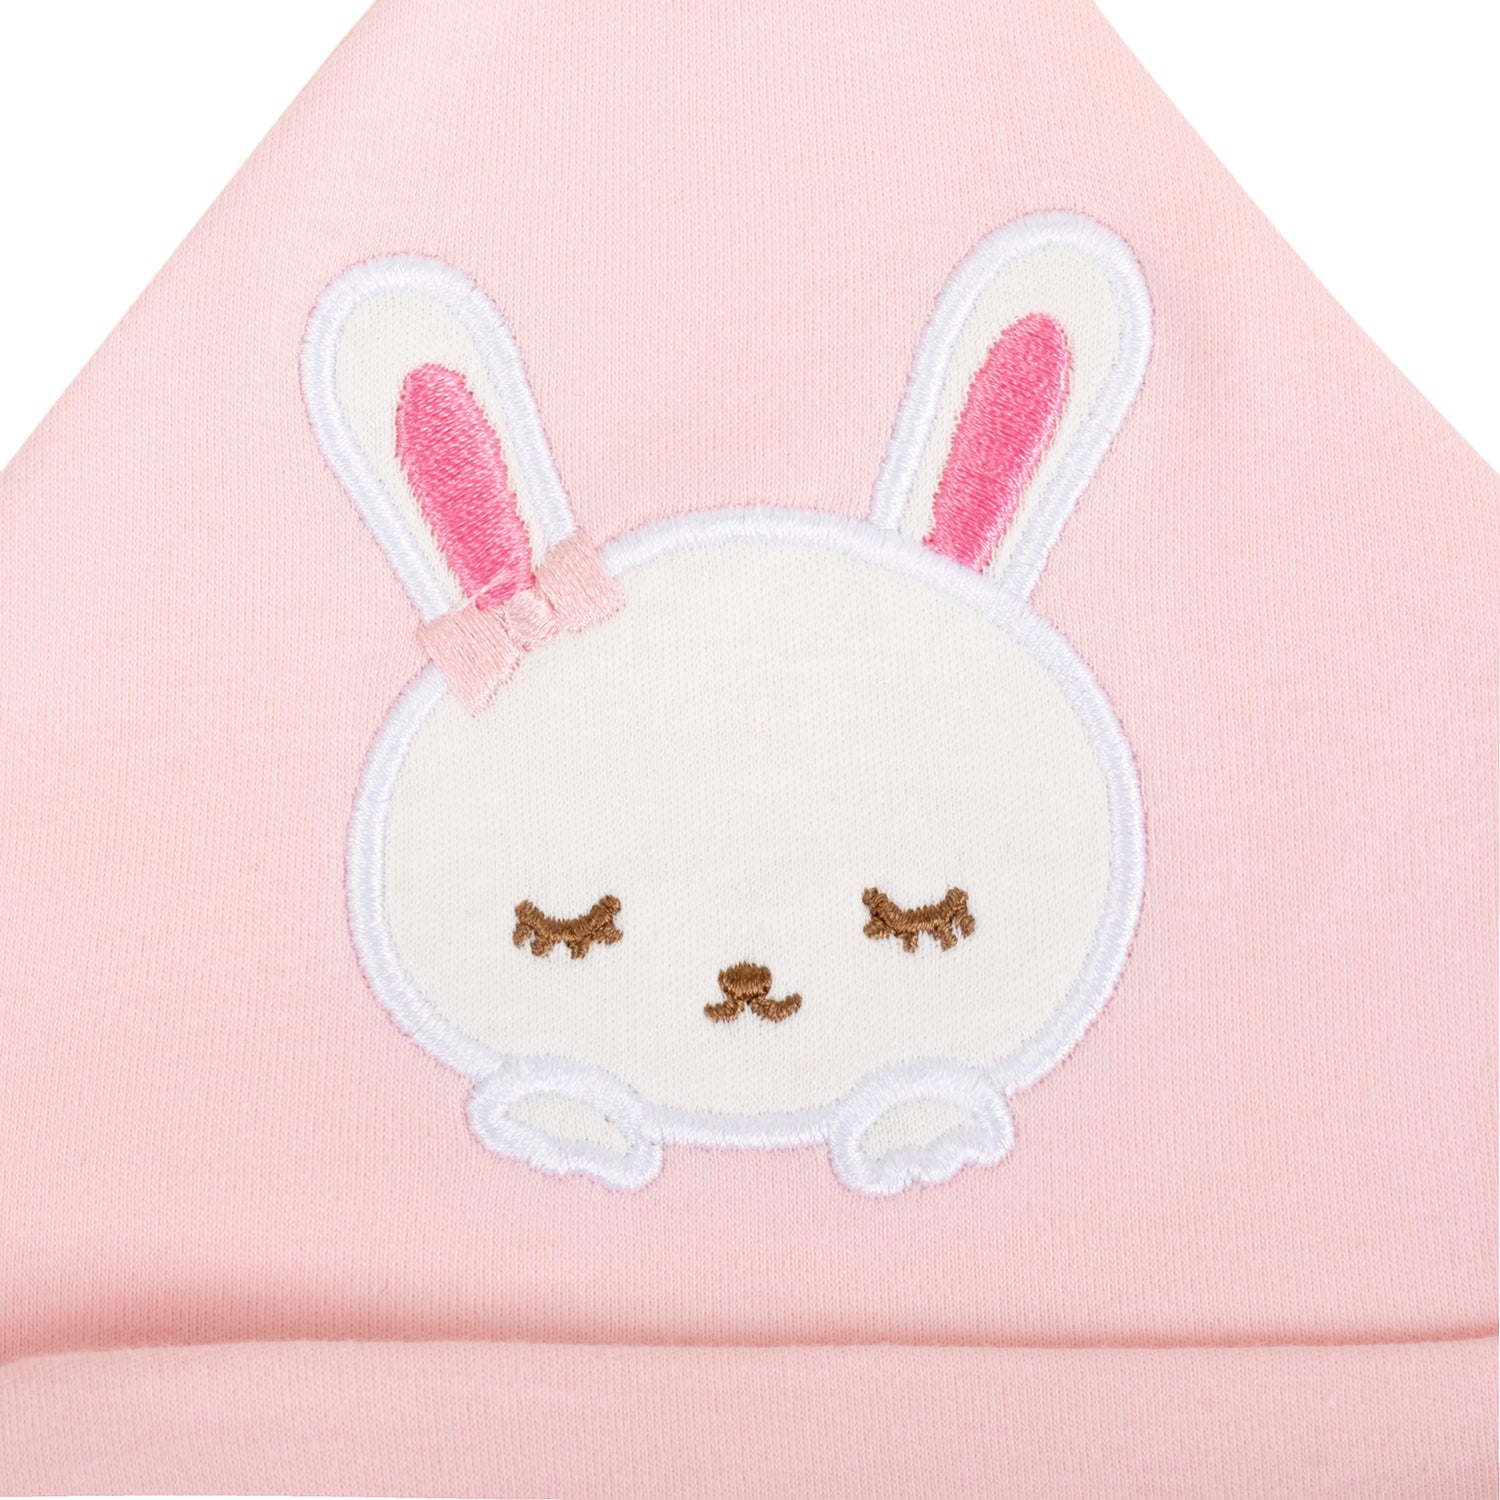 Baby Moo Sleepy Bunny Knotted Infants Ultra Soft 100% Cotton All Season Pack of 3 Caps - Pink